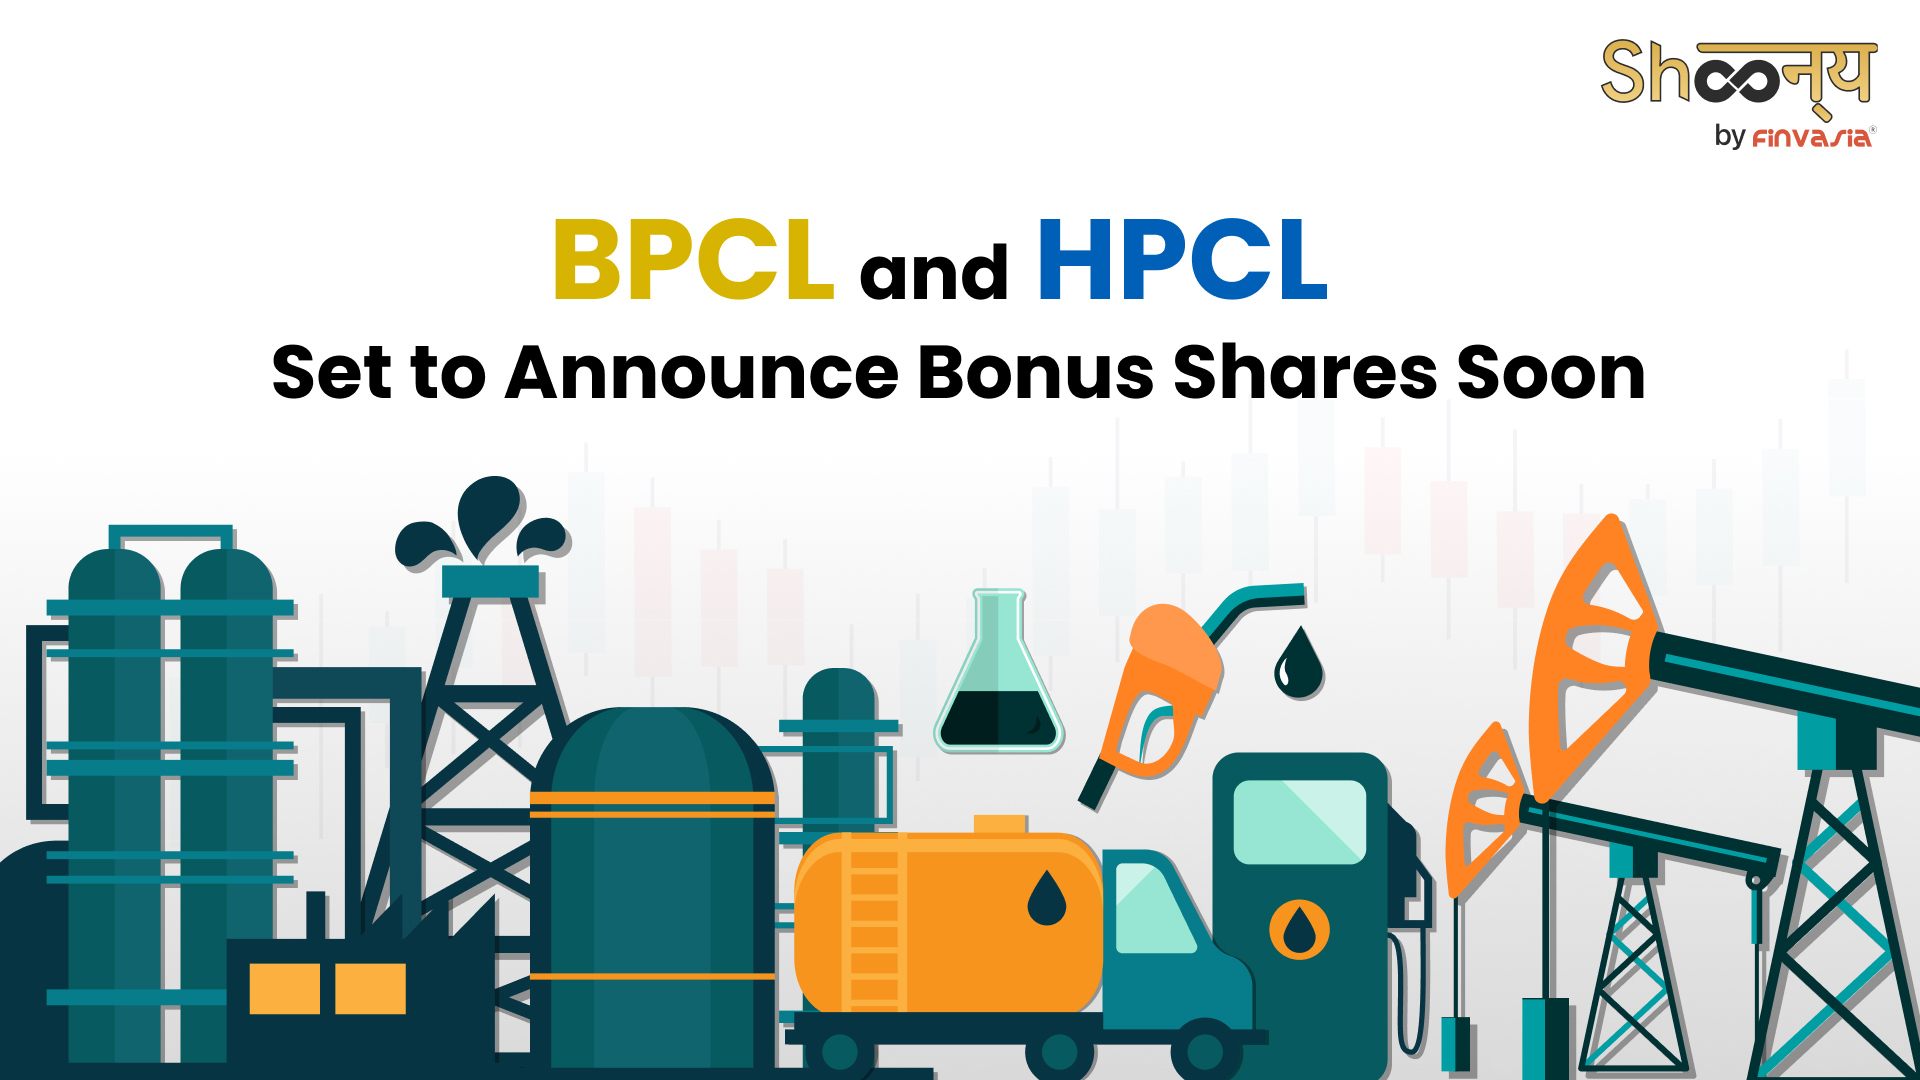 BPCL and HPCL's Latest Bonus Share Plans: A Quick Overview